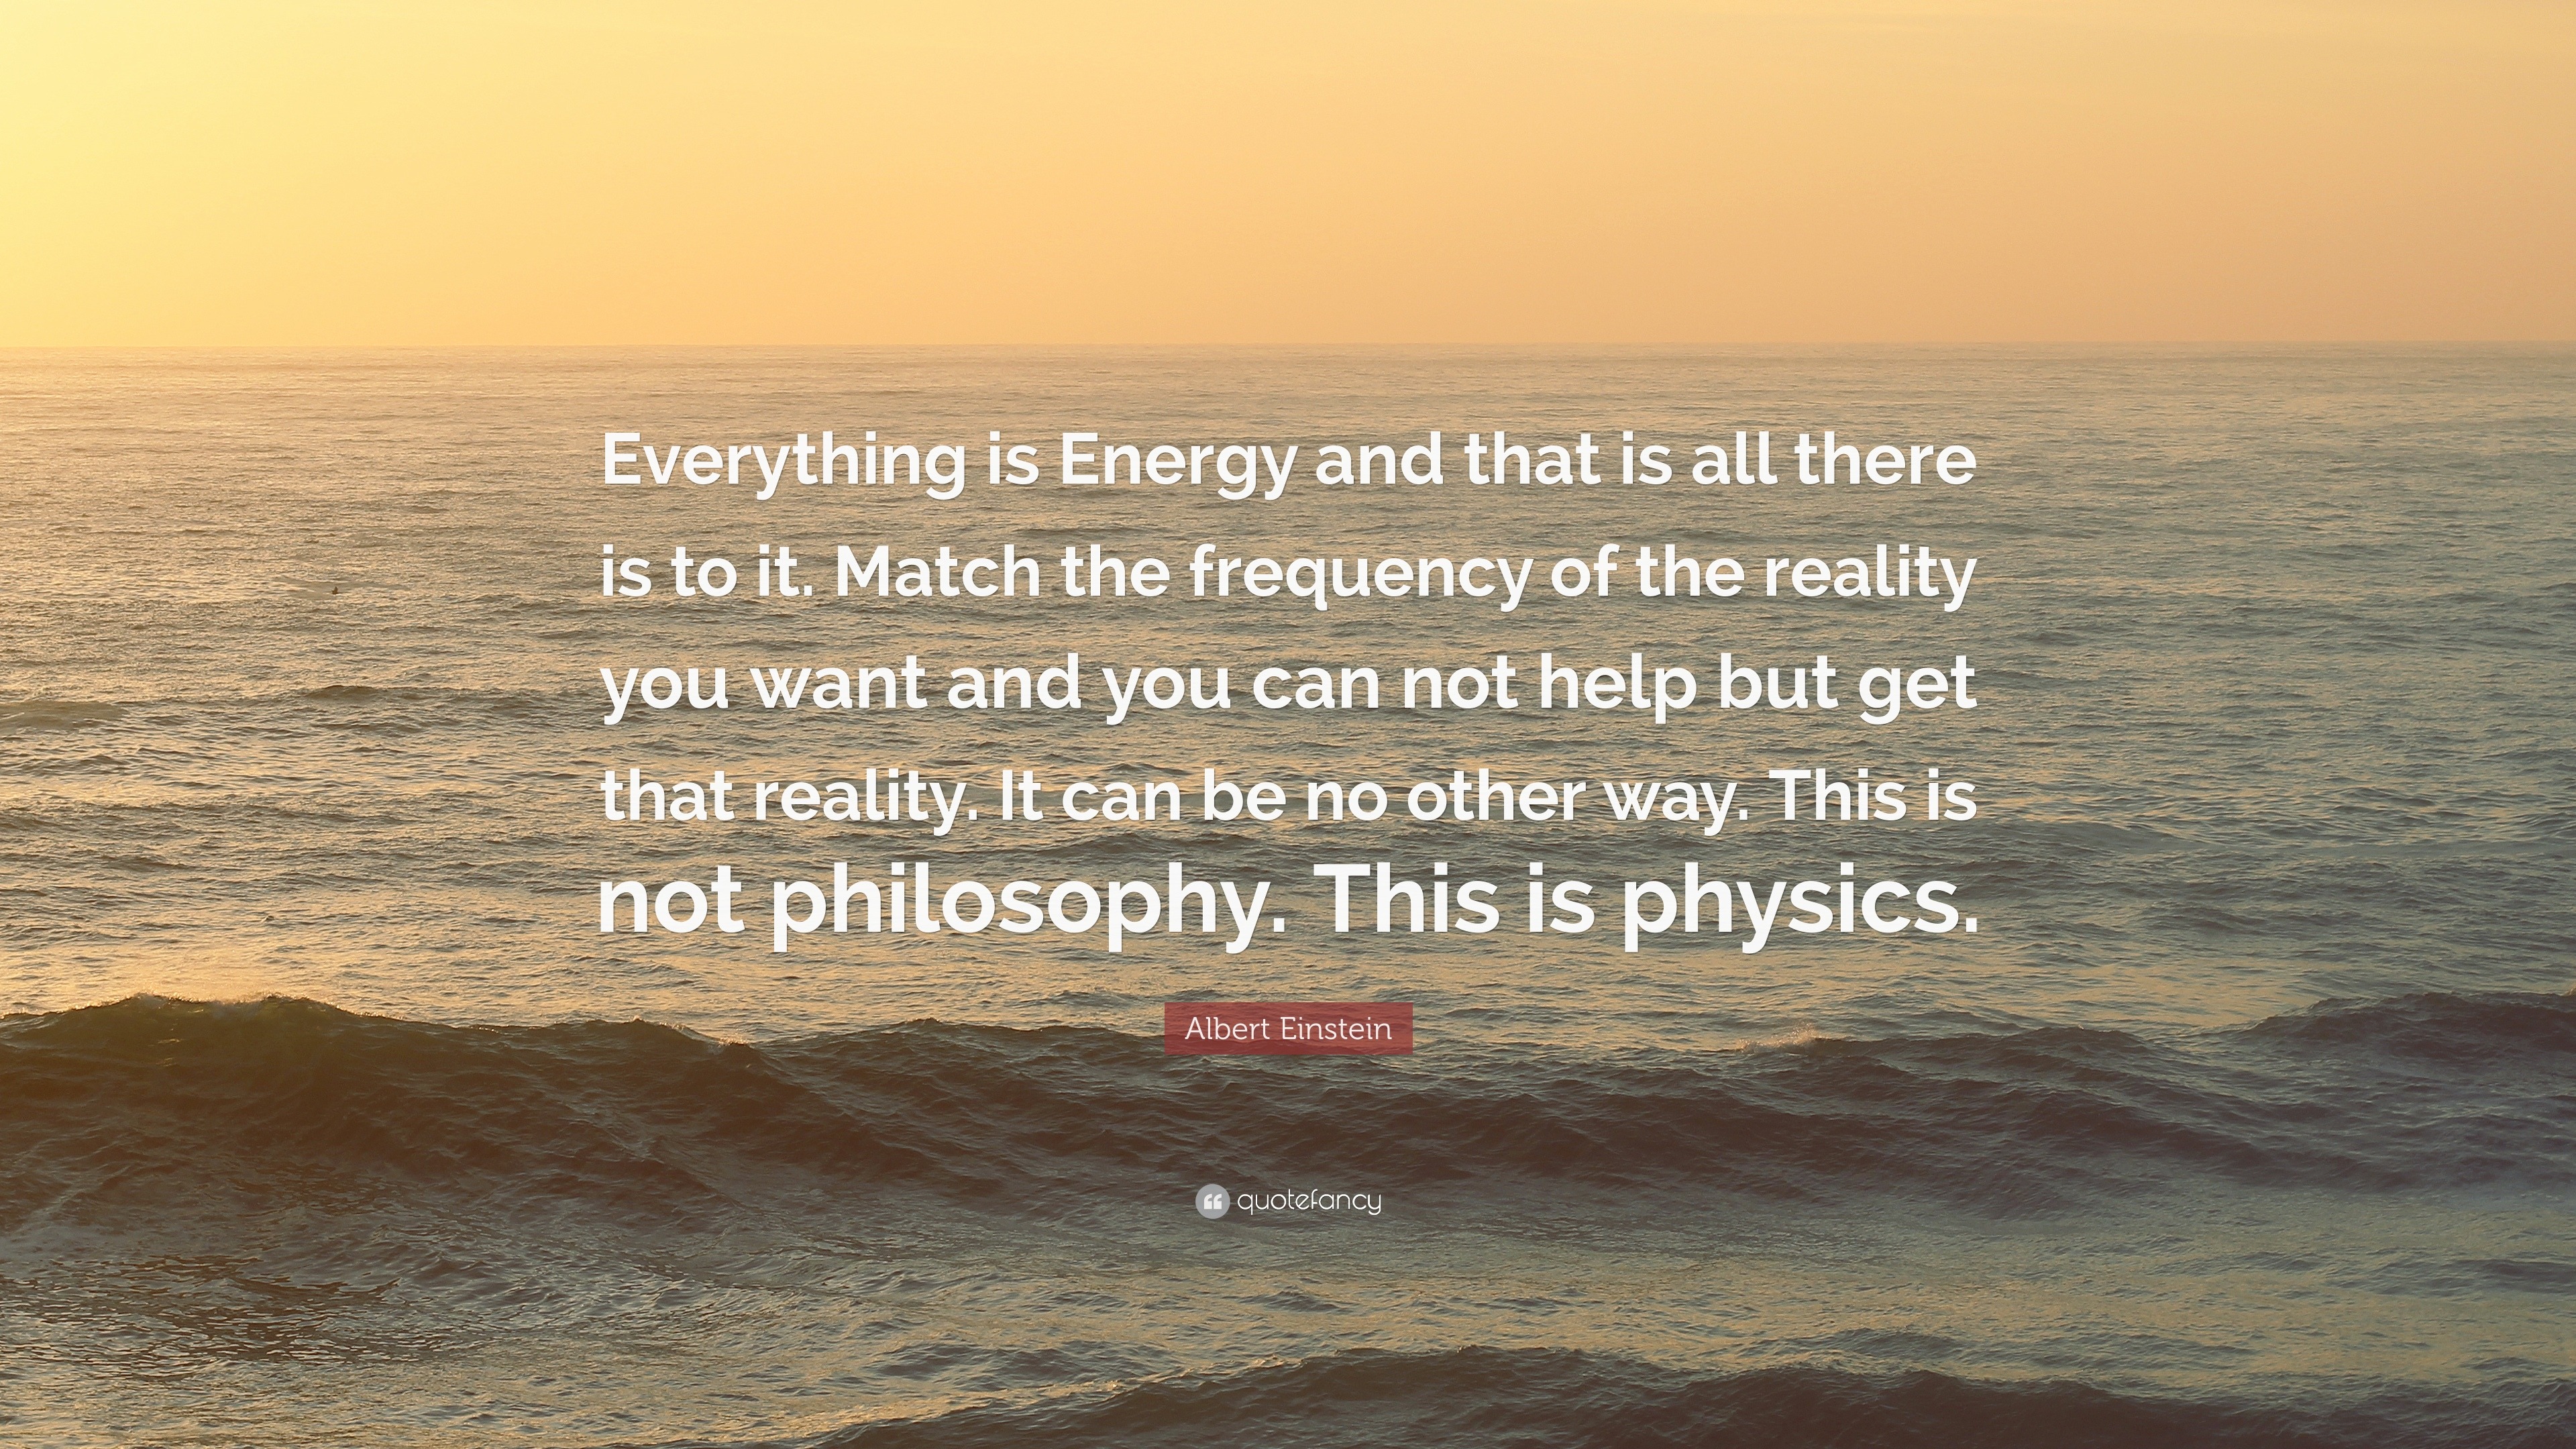 Albert Einstein Quote: “Everything is Energy and that is all there is